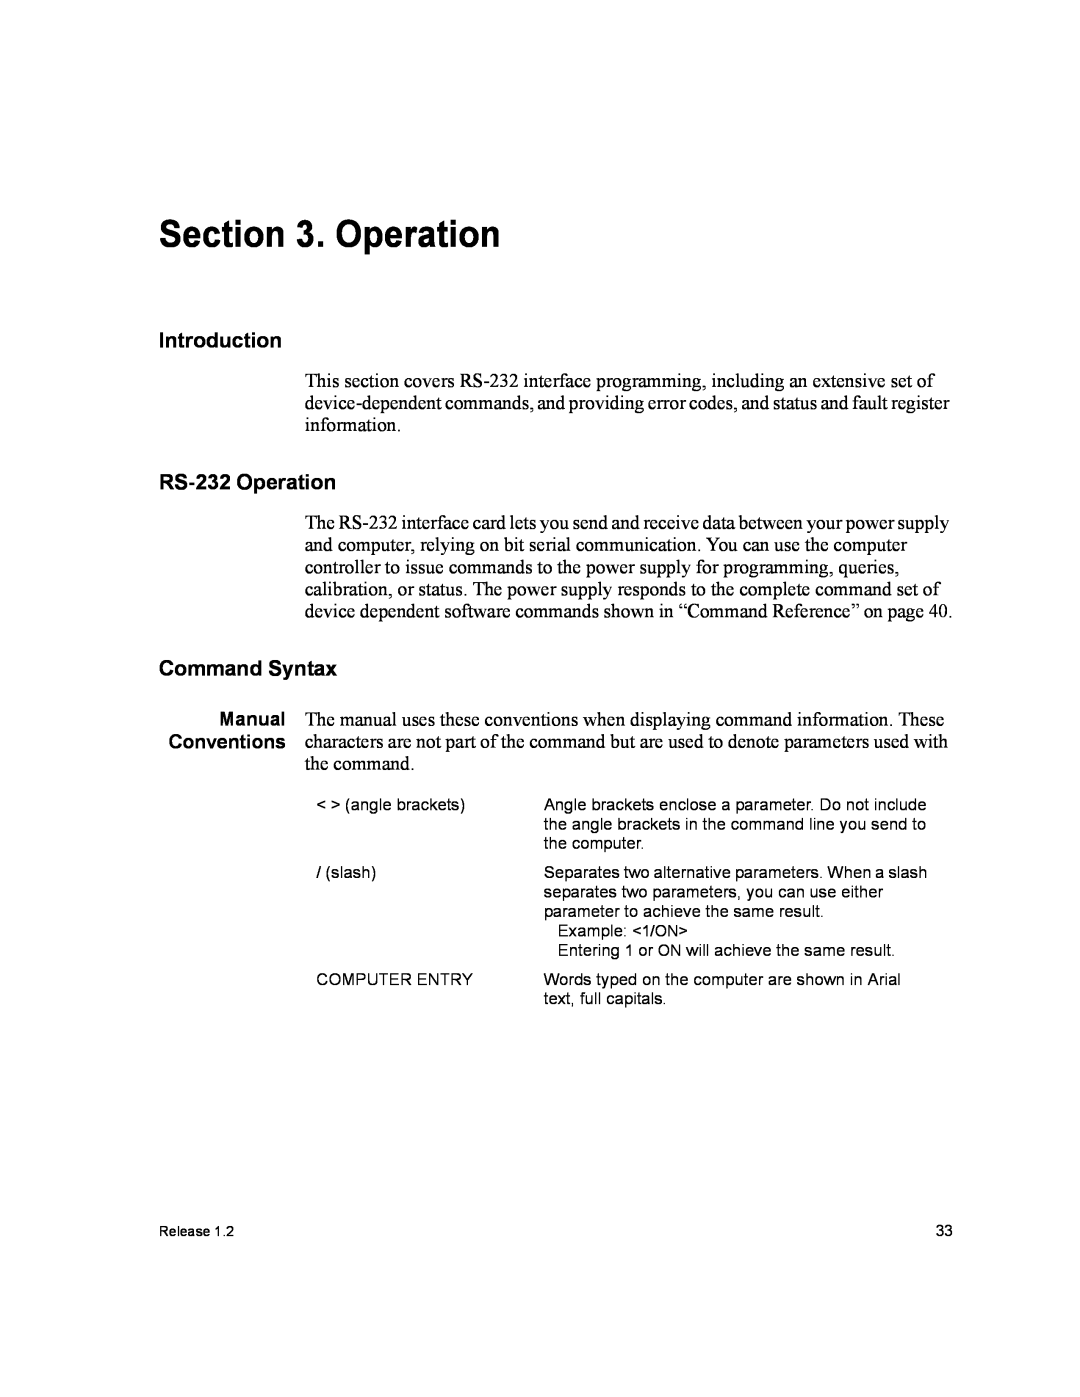 Xantrex Technology RS232-XPD manual RS-232 Operation, Command Syntax, Introduction 